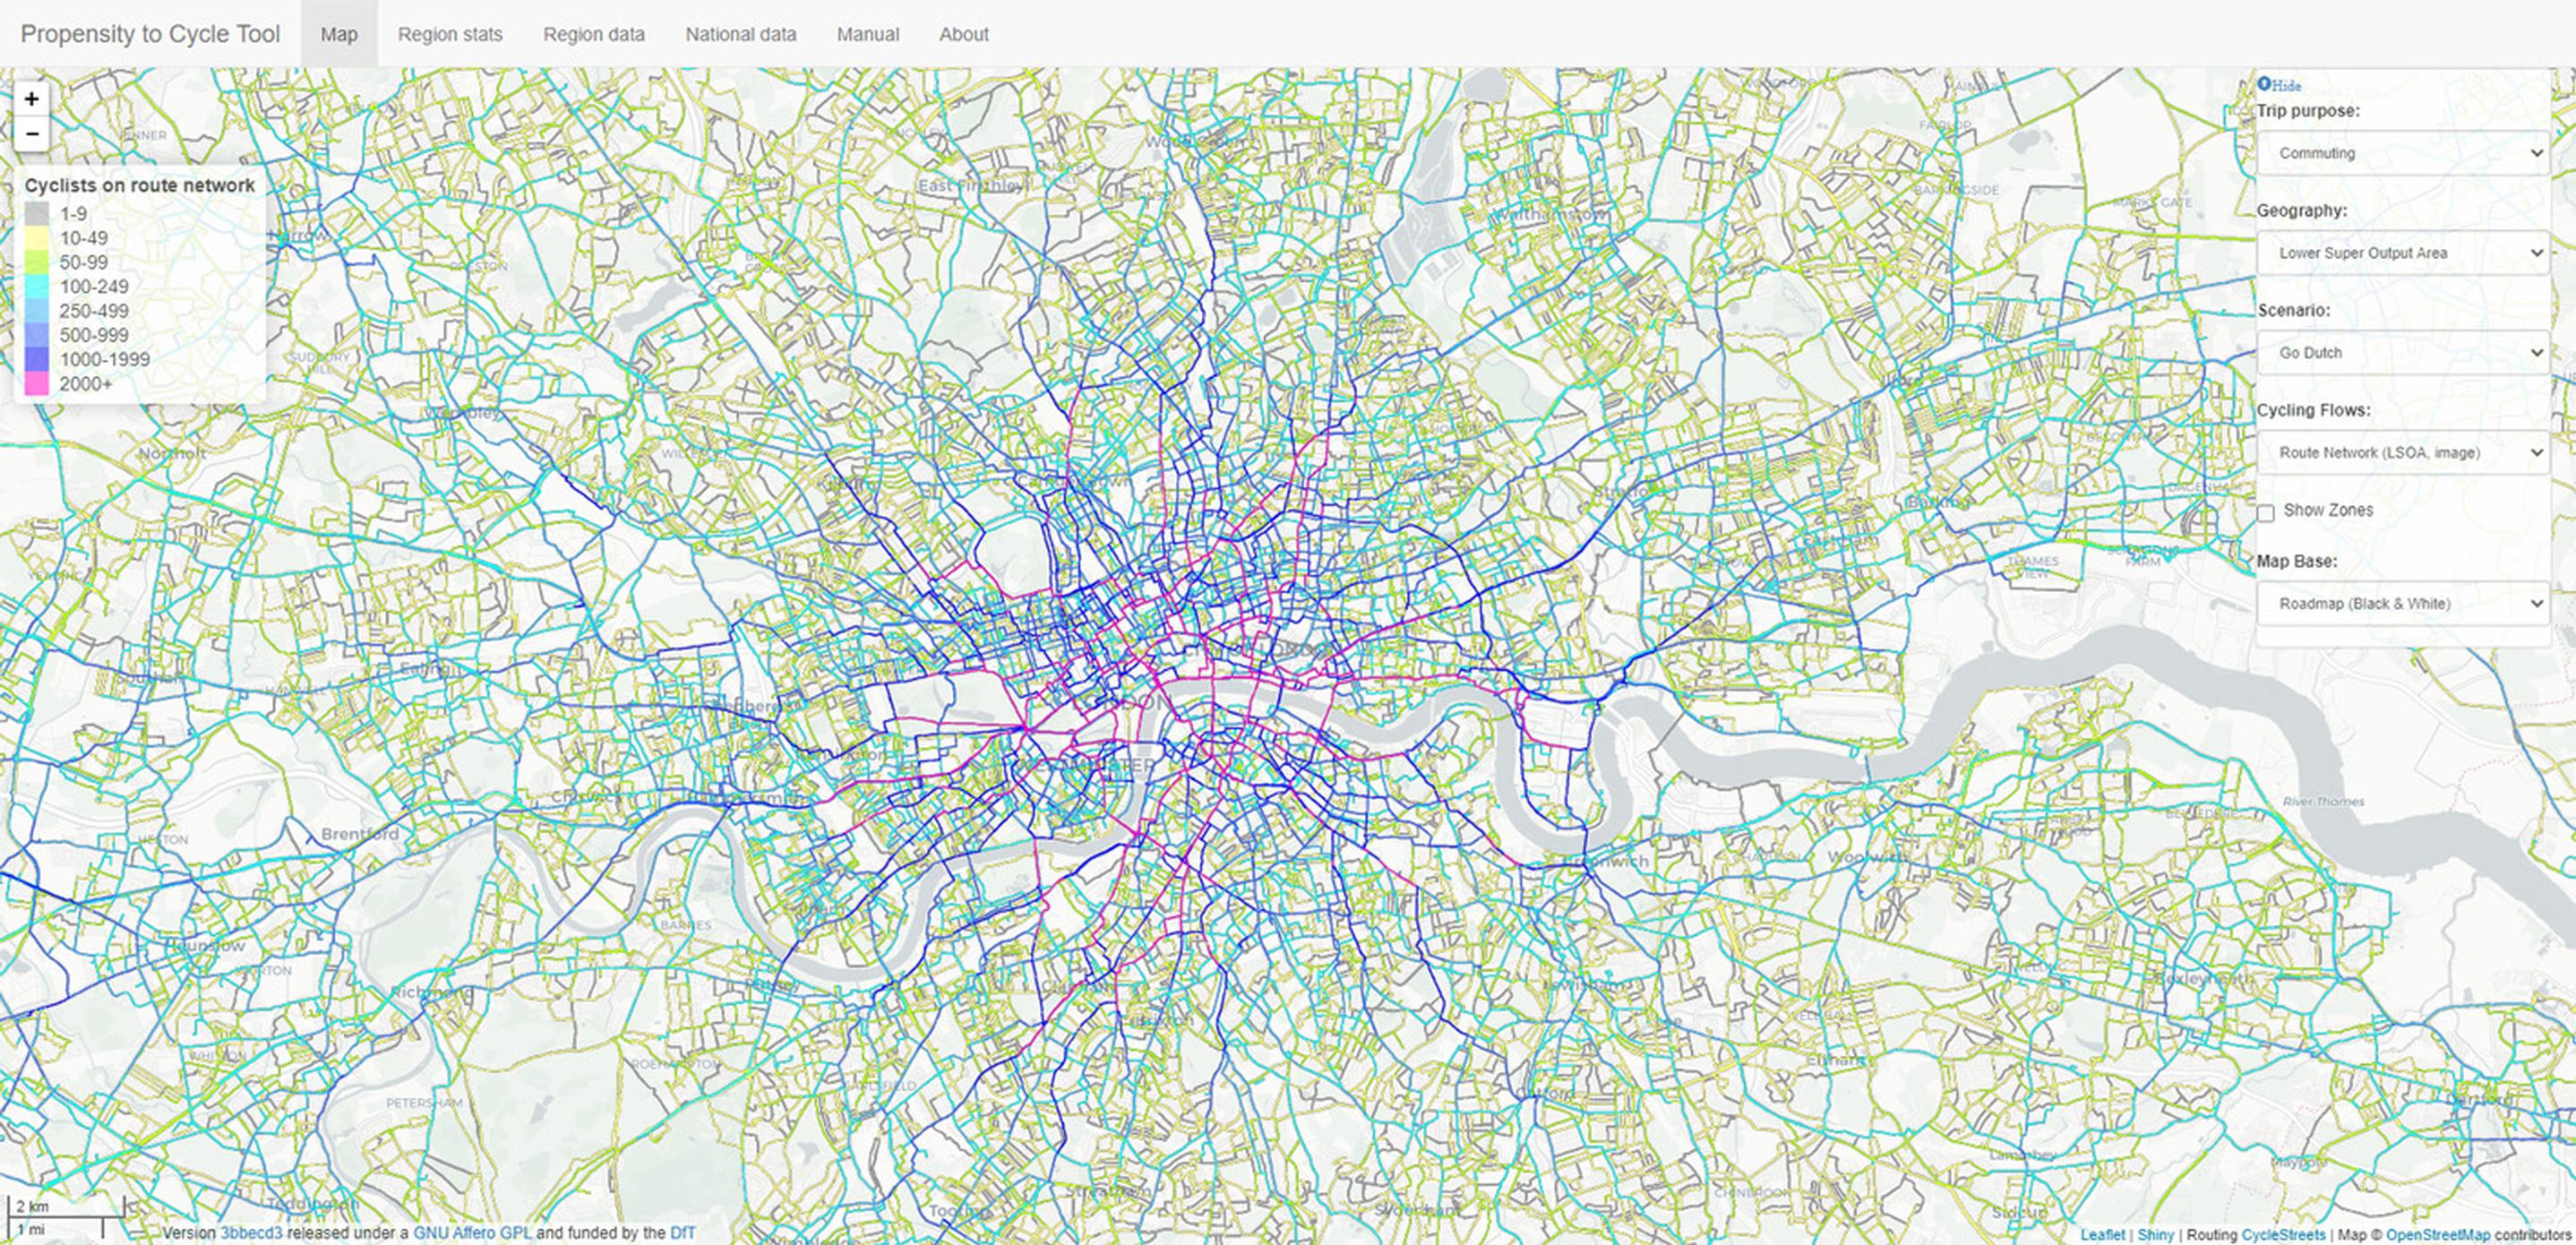 Figure 2: Cycling potential for trips to work in London under the ‘Go Dutch’ scenario. Source: Propensity to Cycle Tool